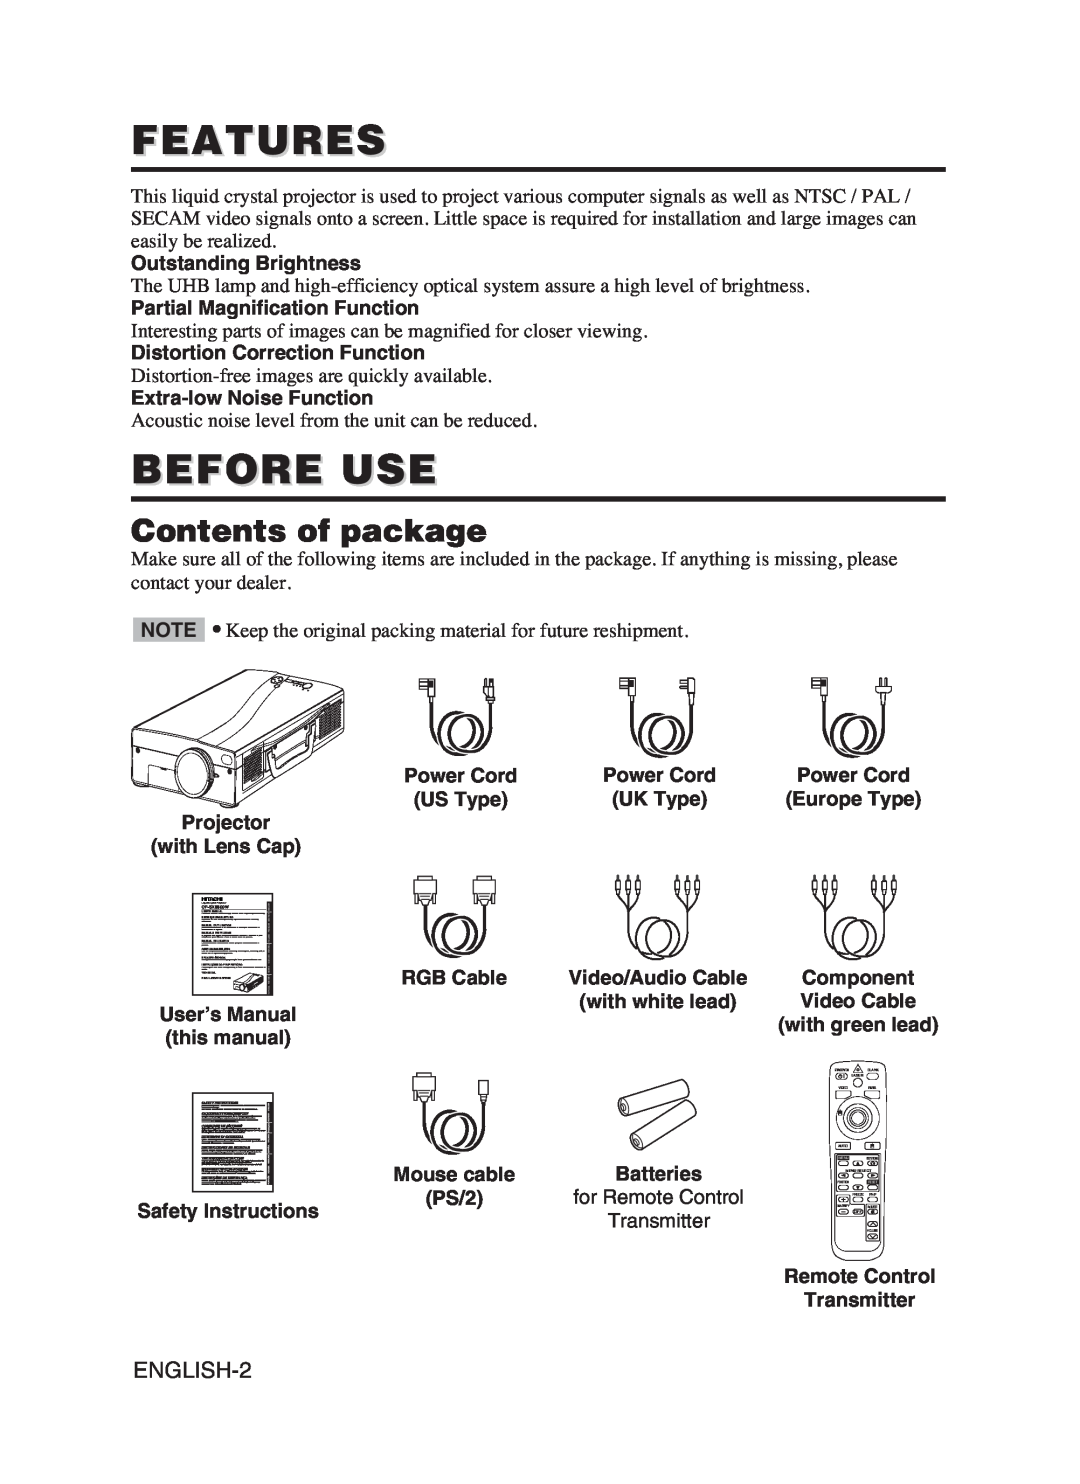 Hitachi CP-SX5600W user manual Features, Before Use, Contents of package 